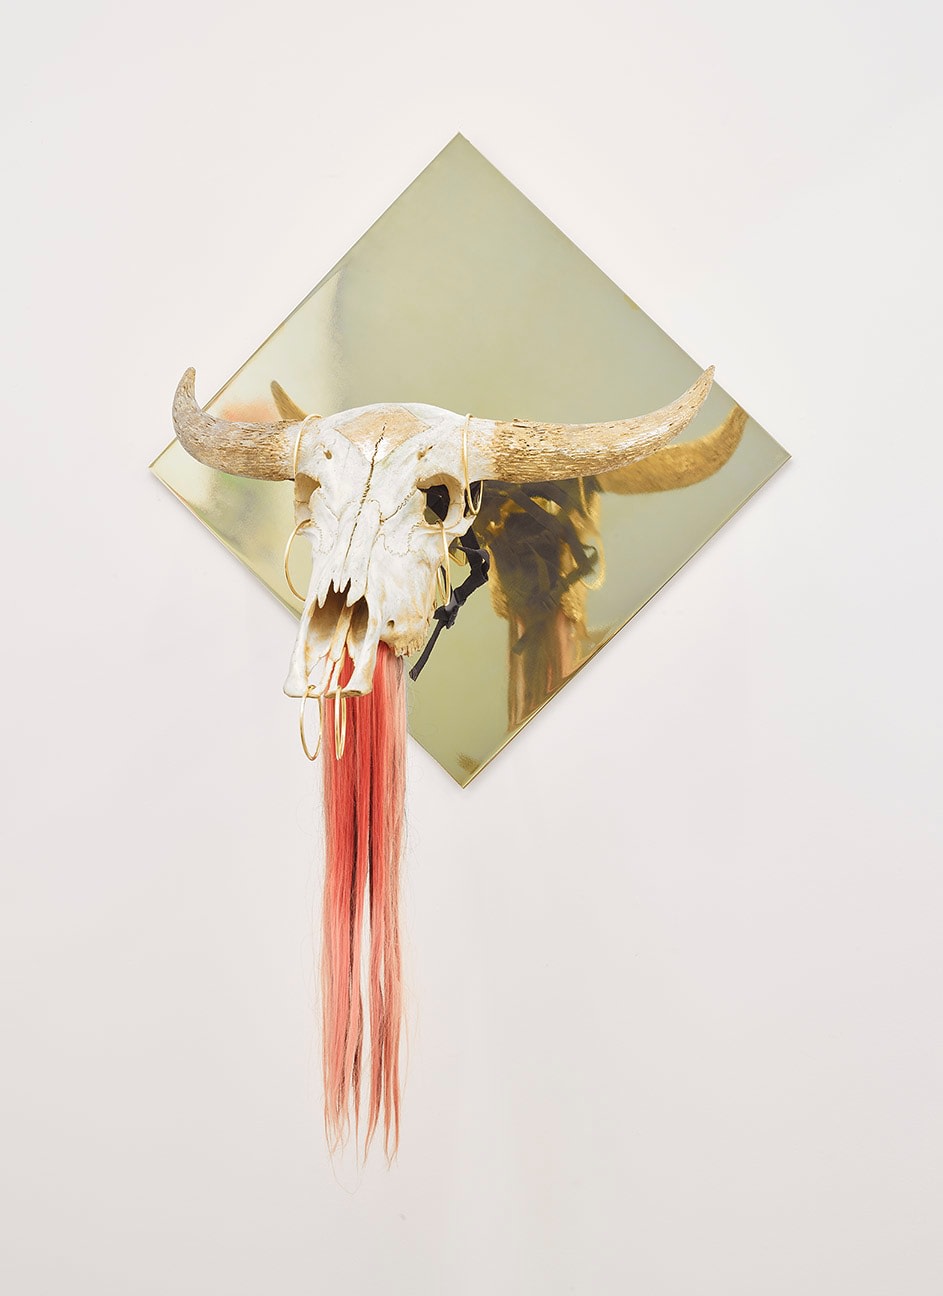 image of the propeller group's Untitled [Ox Head; The Living Need Light, The Dead Need Music], 2014